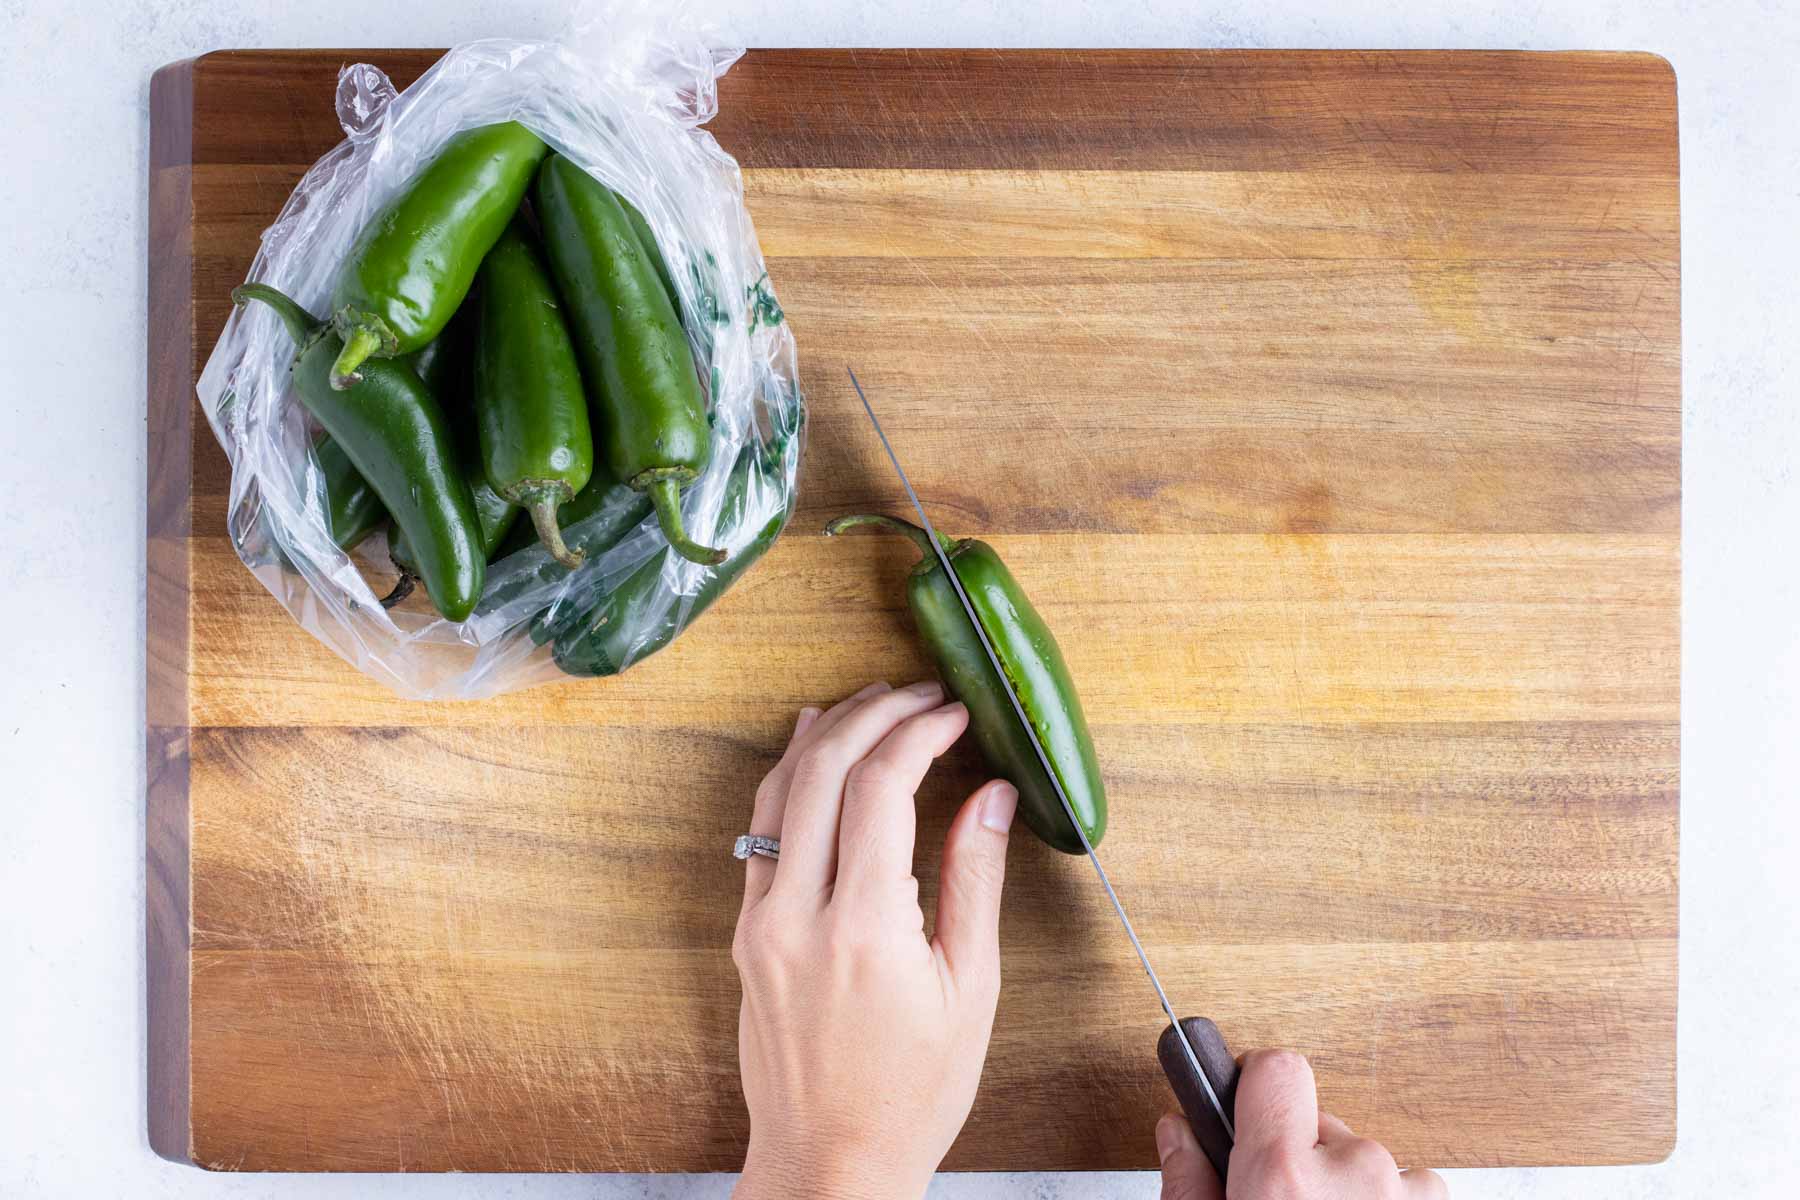 Jalapenos are cut in half with a knife on the counter.